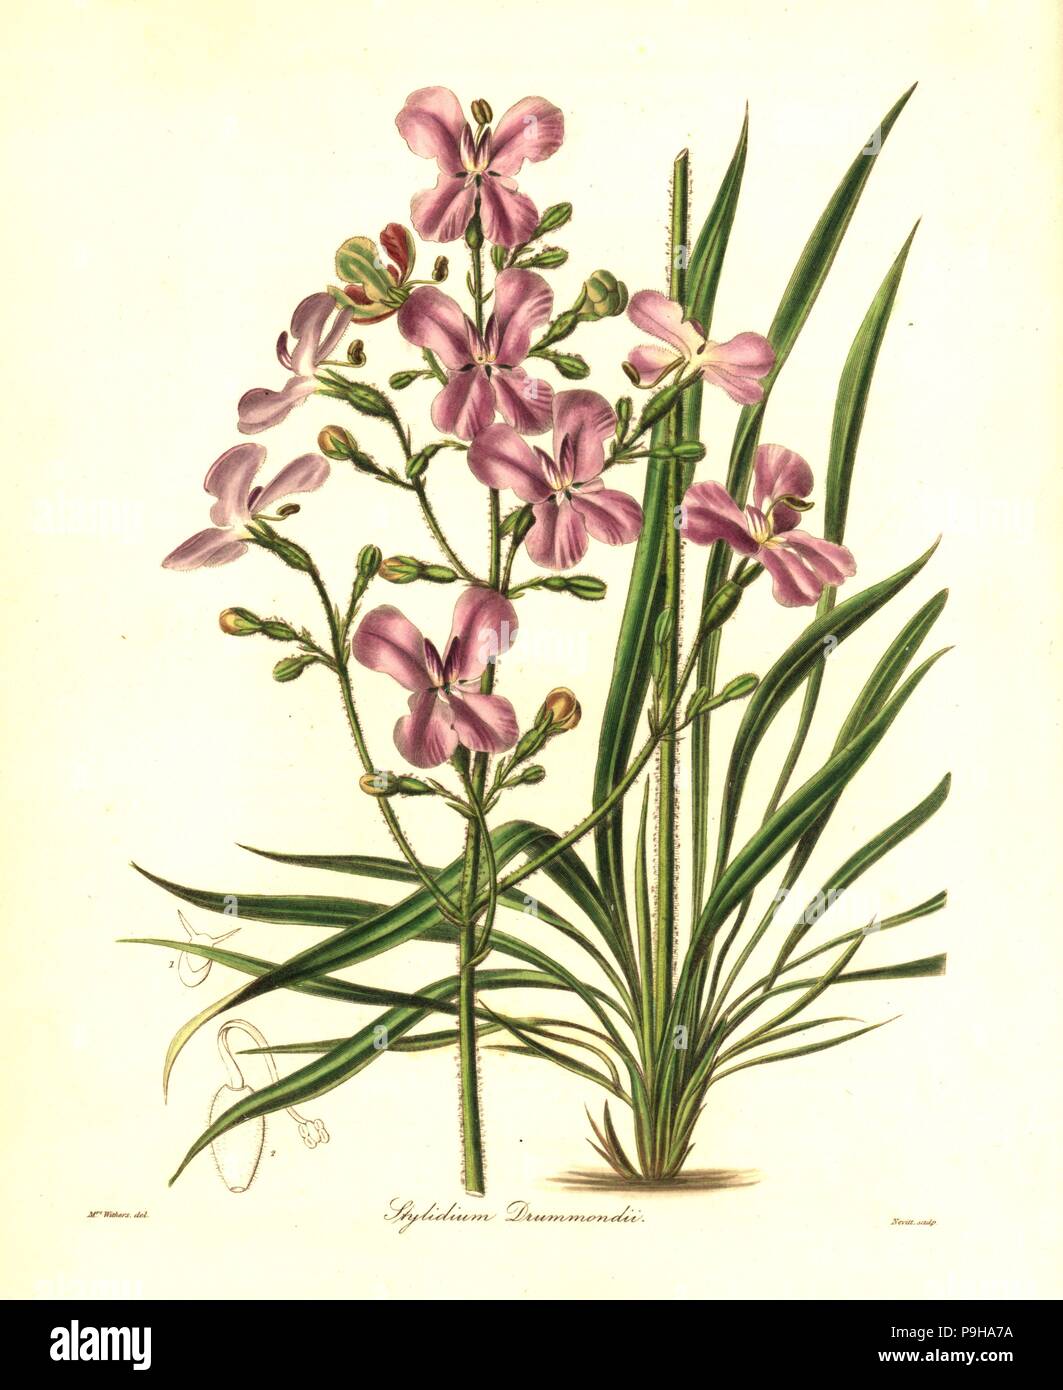 Stylidium affine (Drummond's stylidium, Stylidium drummondii). Handcoloured copperplate engraving by S. Nevitt after a botanical illustration by Mrs Augusta Withers from Benjamin Maund and the Rev. John Stevens Henslow's The Botanist, London, 1836. Stock Photo